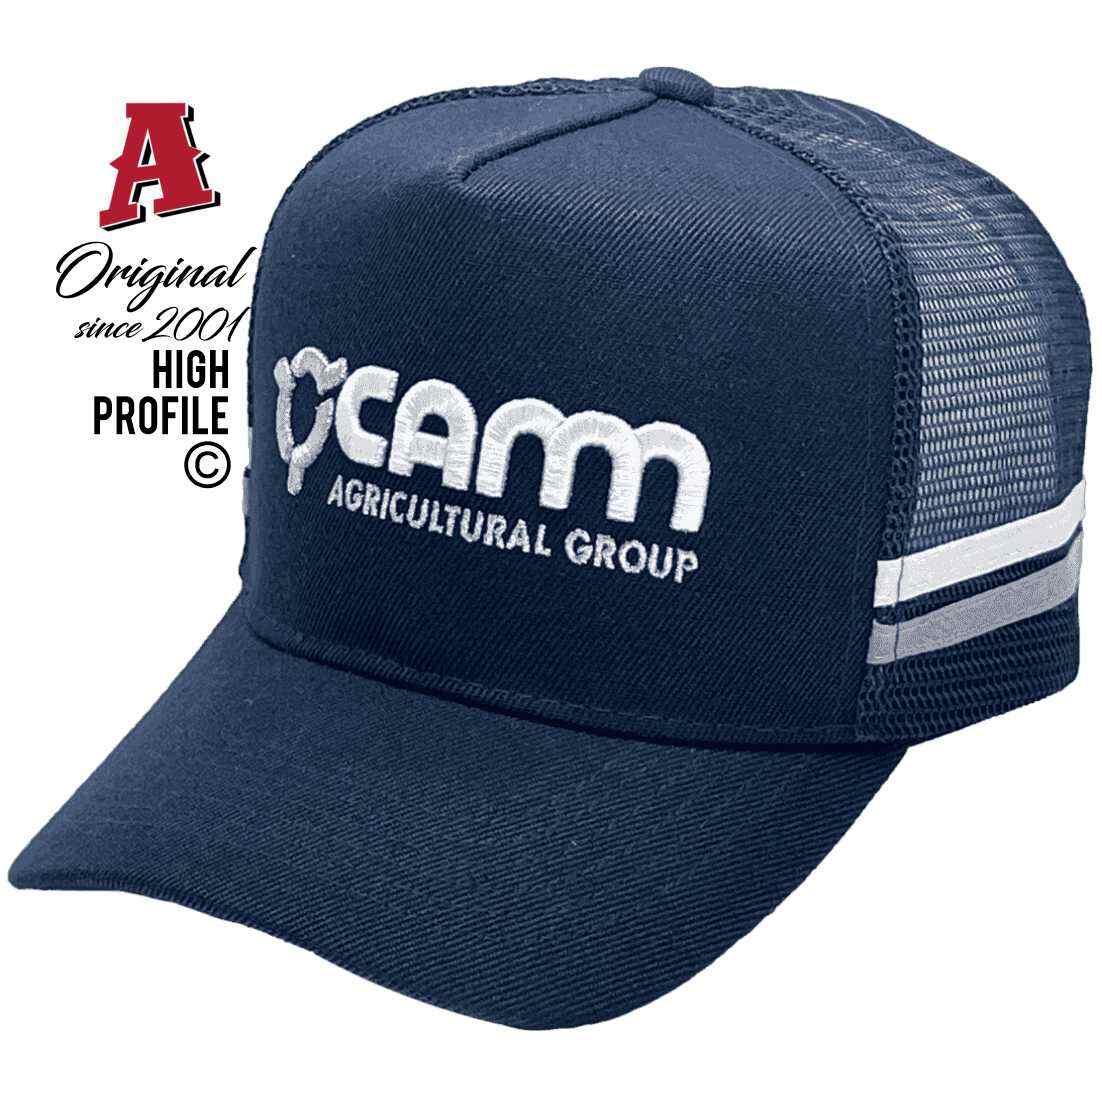 Camm Agricultural Group Bowenville QLD Basic Aussie Trucker Hats with Australian HeadFit Crown 2 SideBands Navy Snapback